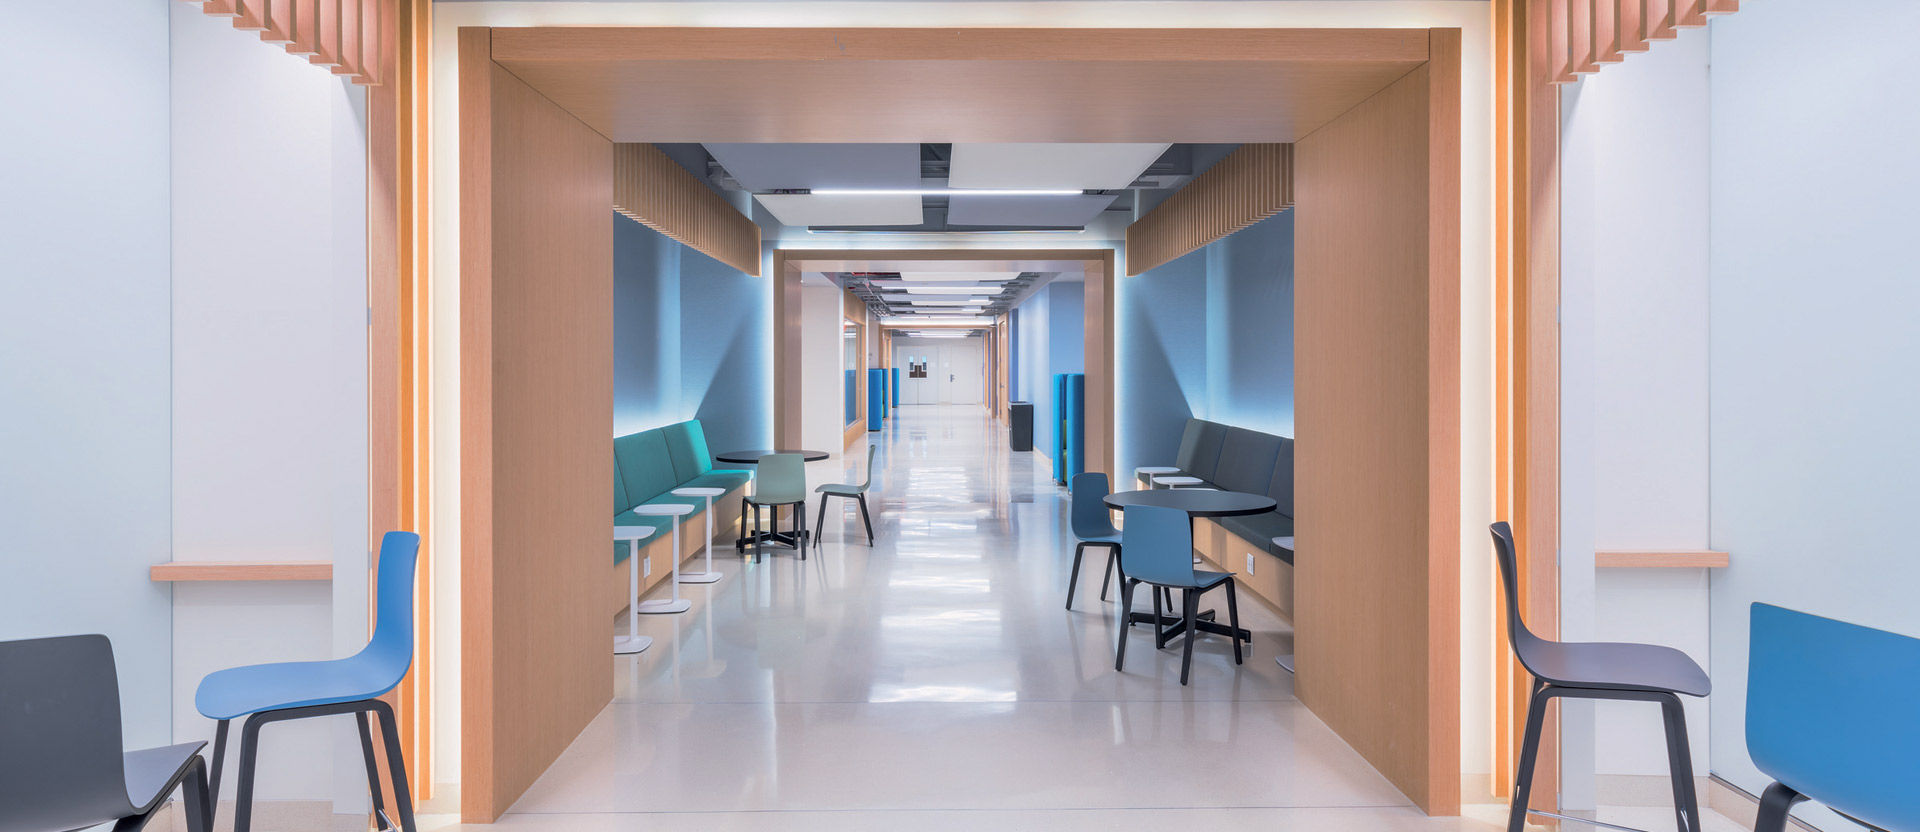 Modern corridor with clean lines, featuring wood-accented alcoves, teal and blue furnishing, and efficient LED lighting guiding the way. The design merges functionality with comforting aesthetics to ease navigation and enhance patient comfort.